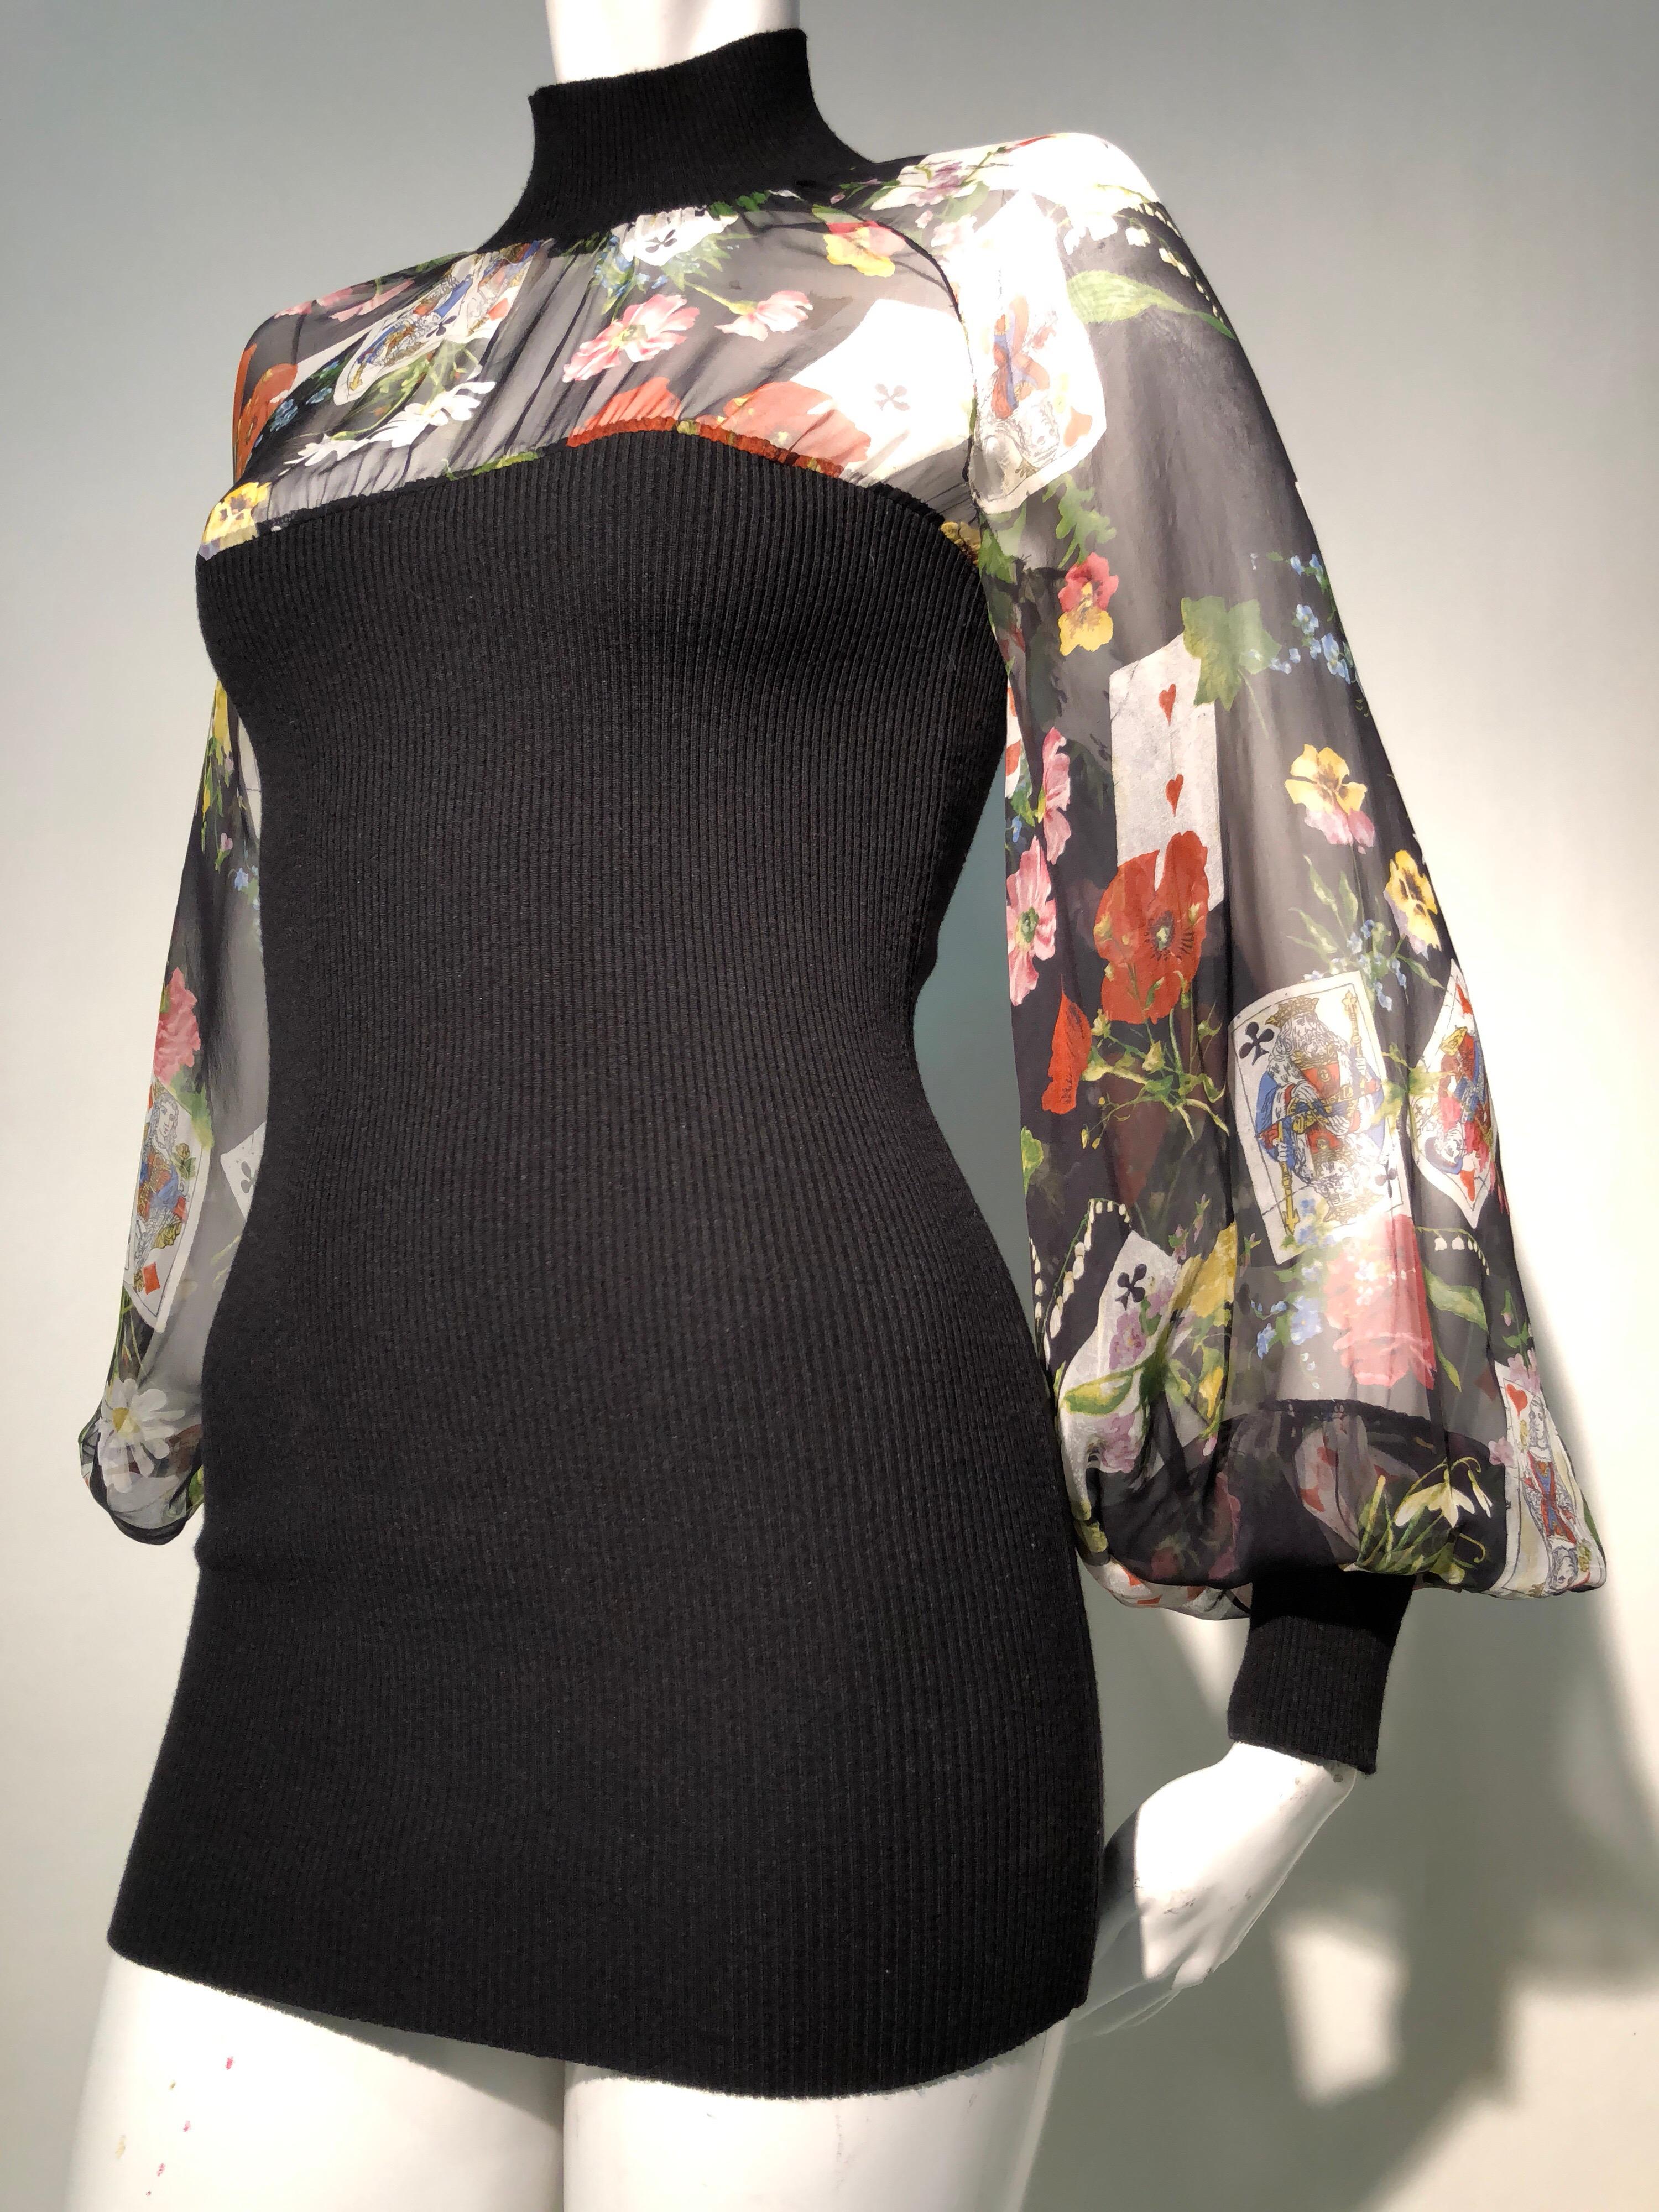 Christian Dior Black Mini Dress with Floral and Playing Card Chiffon Top, 1990s 1